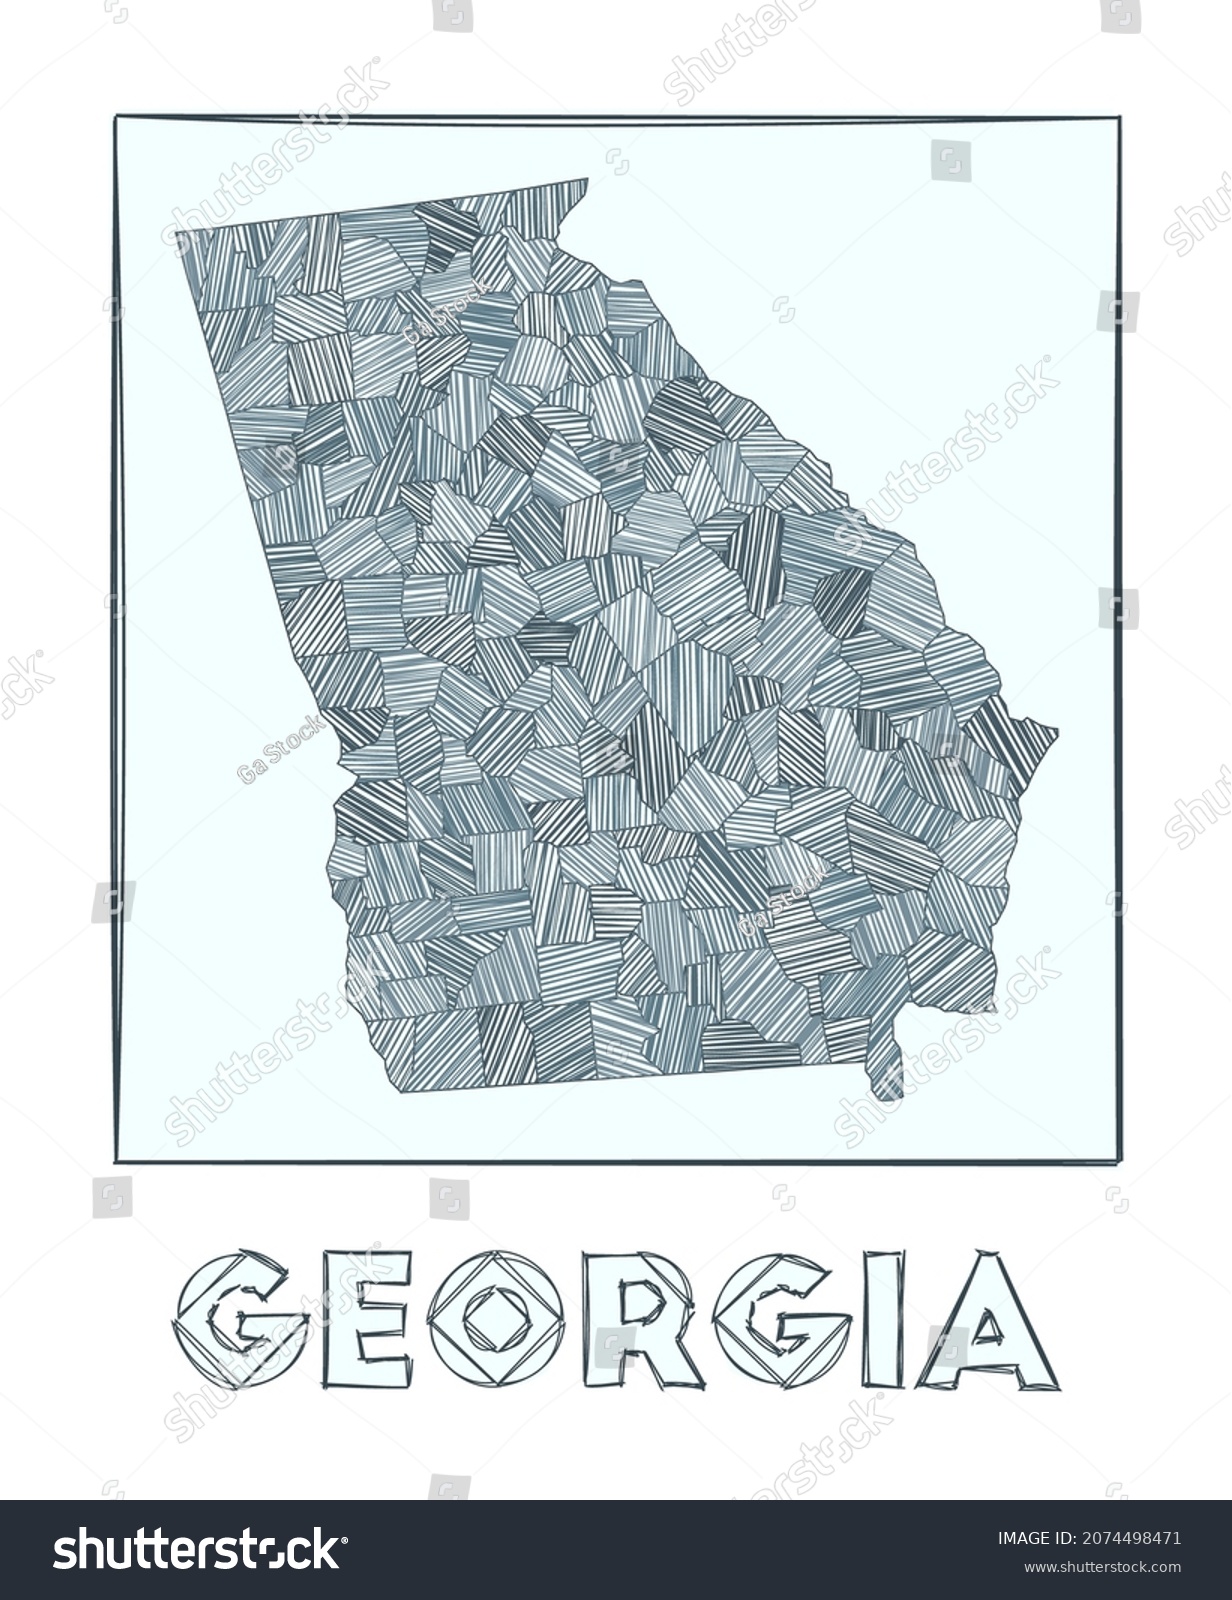 Sketch Map Georgia Grayscale Hand Drawn Stock Vector Royalty Free 2074498471 2521